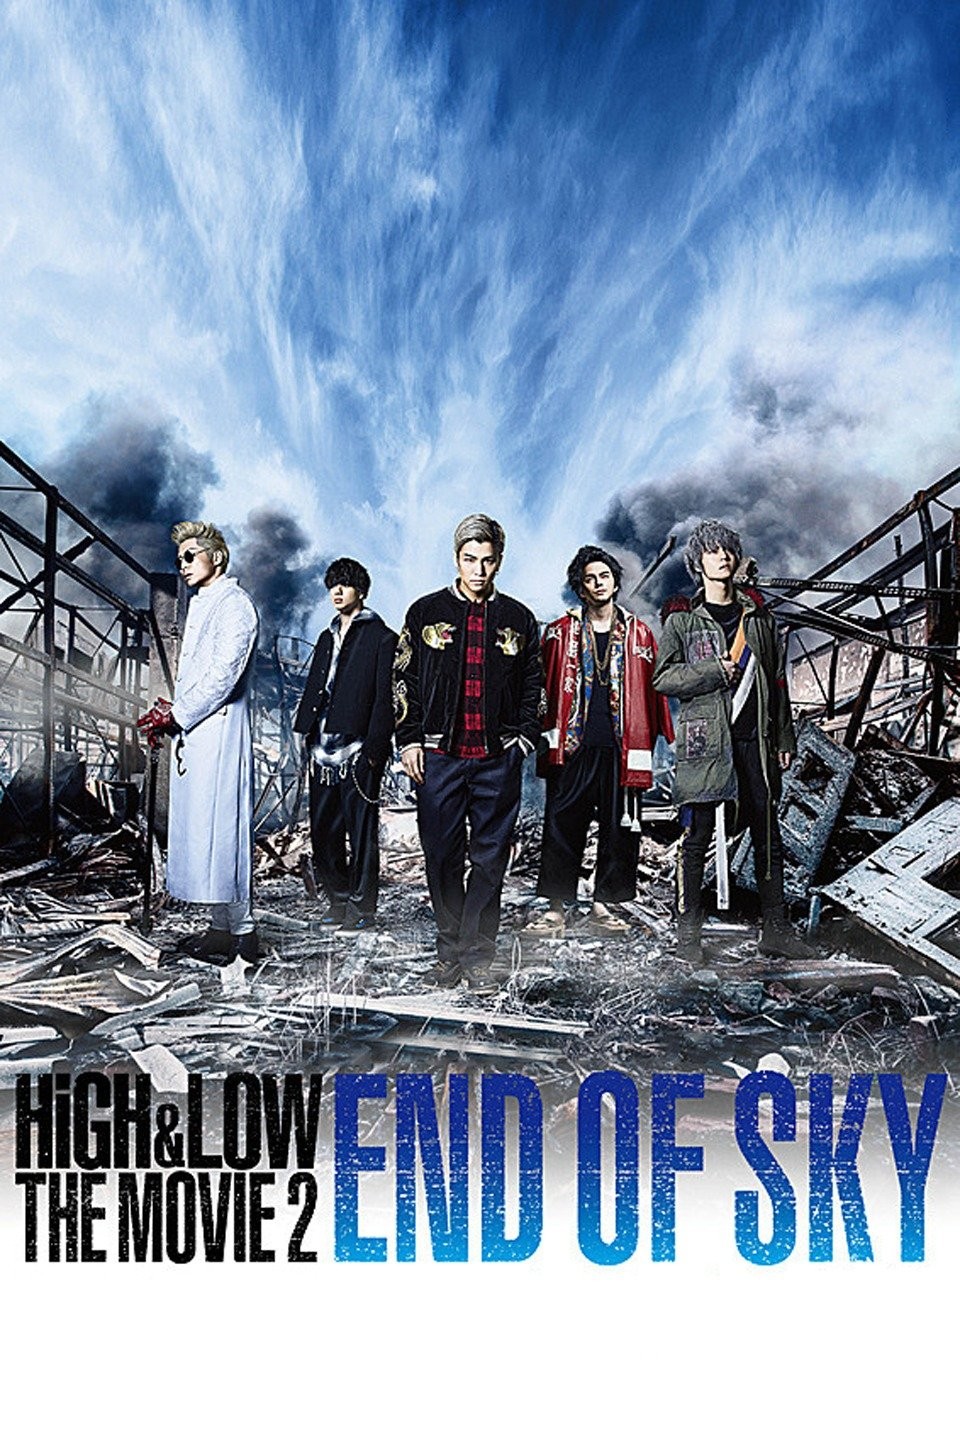 High & Low: The Movie 2 - End of Sky | Rotten Tomatoes